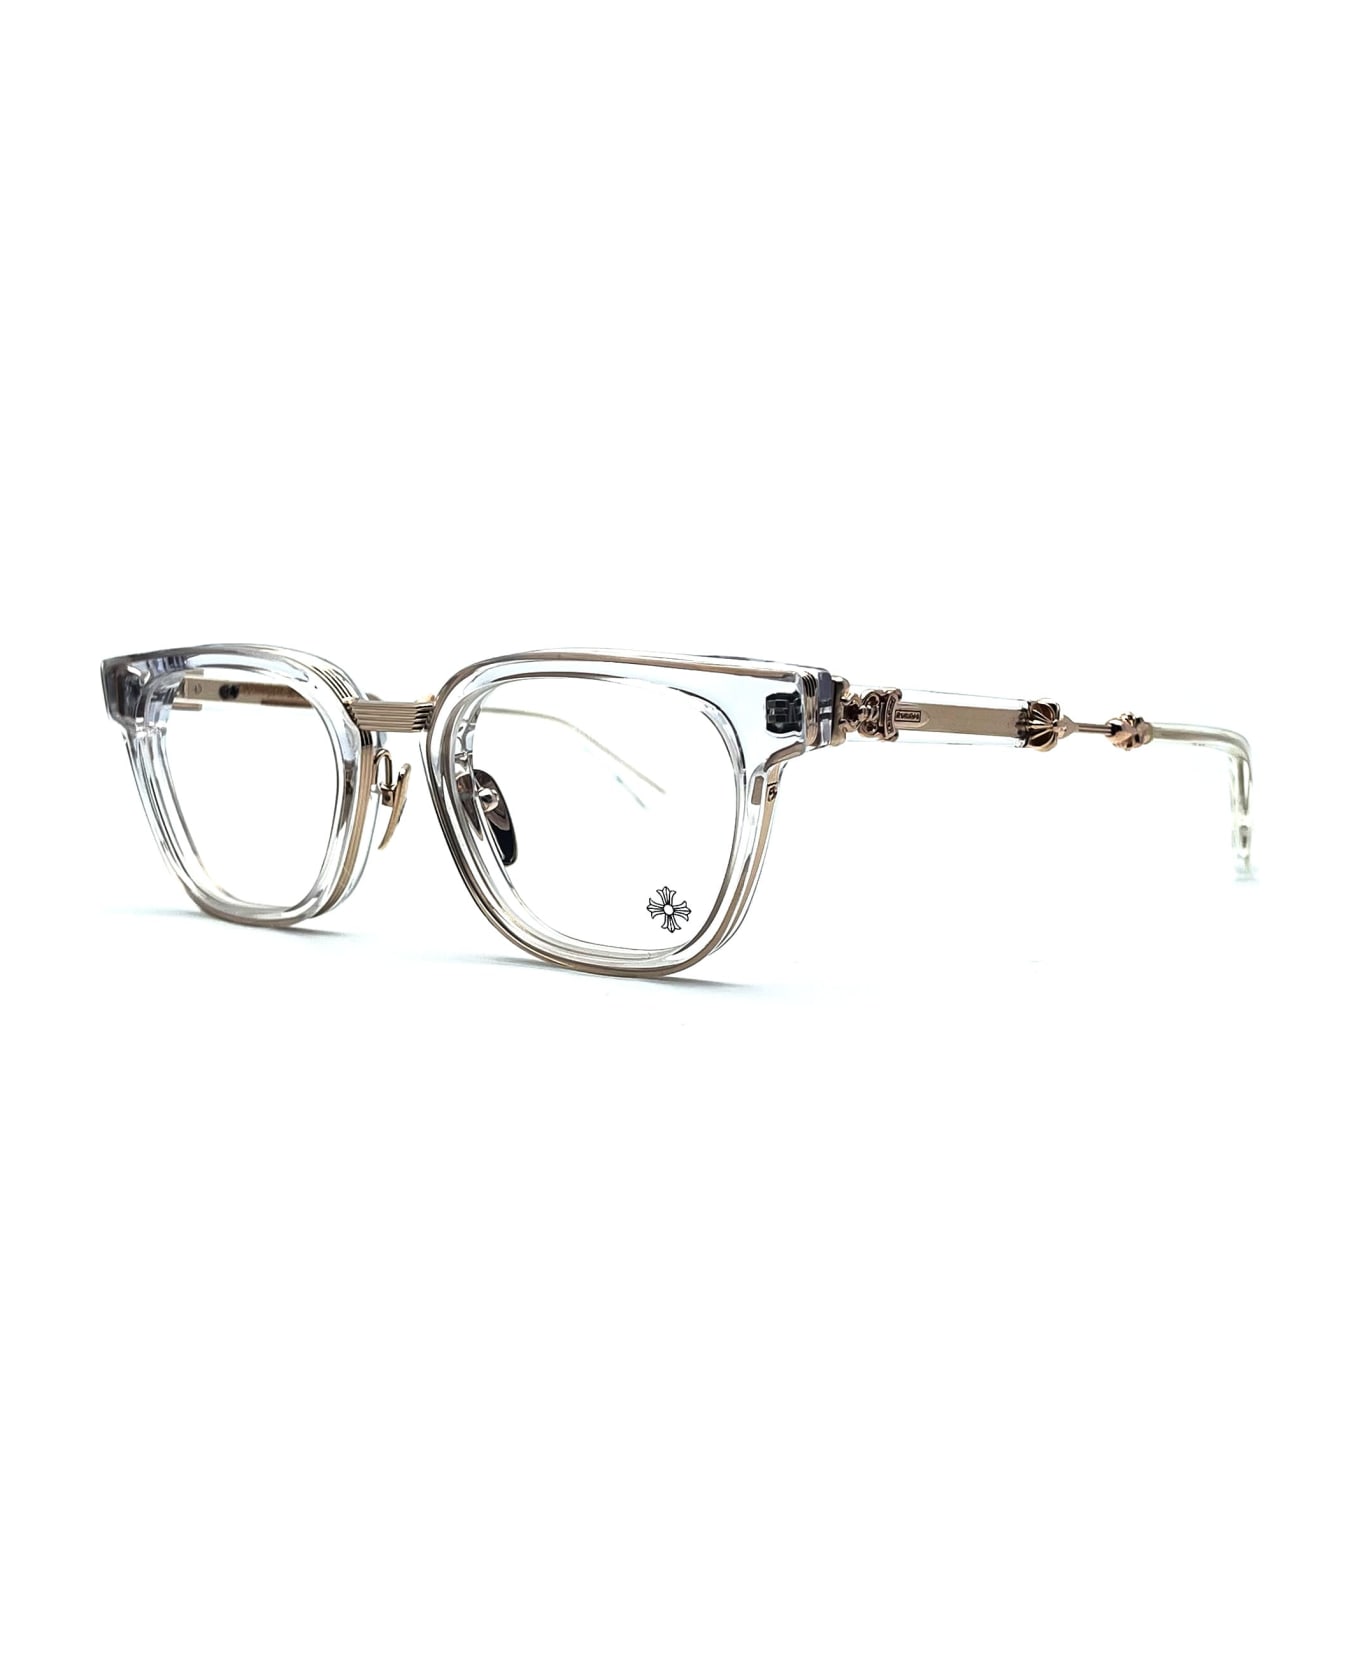 Chrome Hearts Duck Butter - Cristal / Gold Rx Glasses - Crystal アイウェア